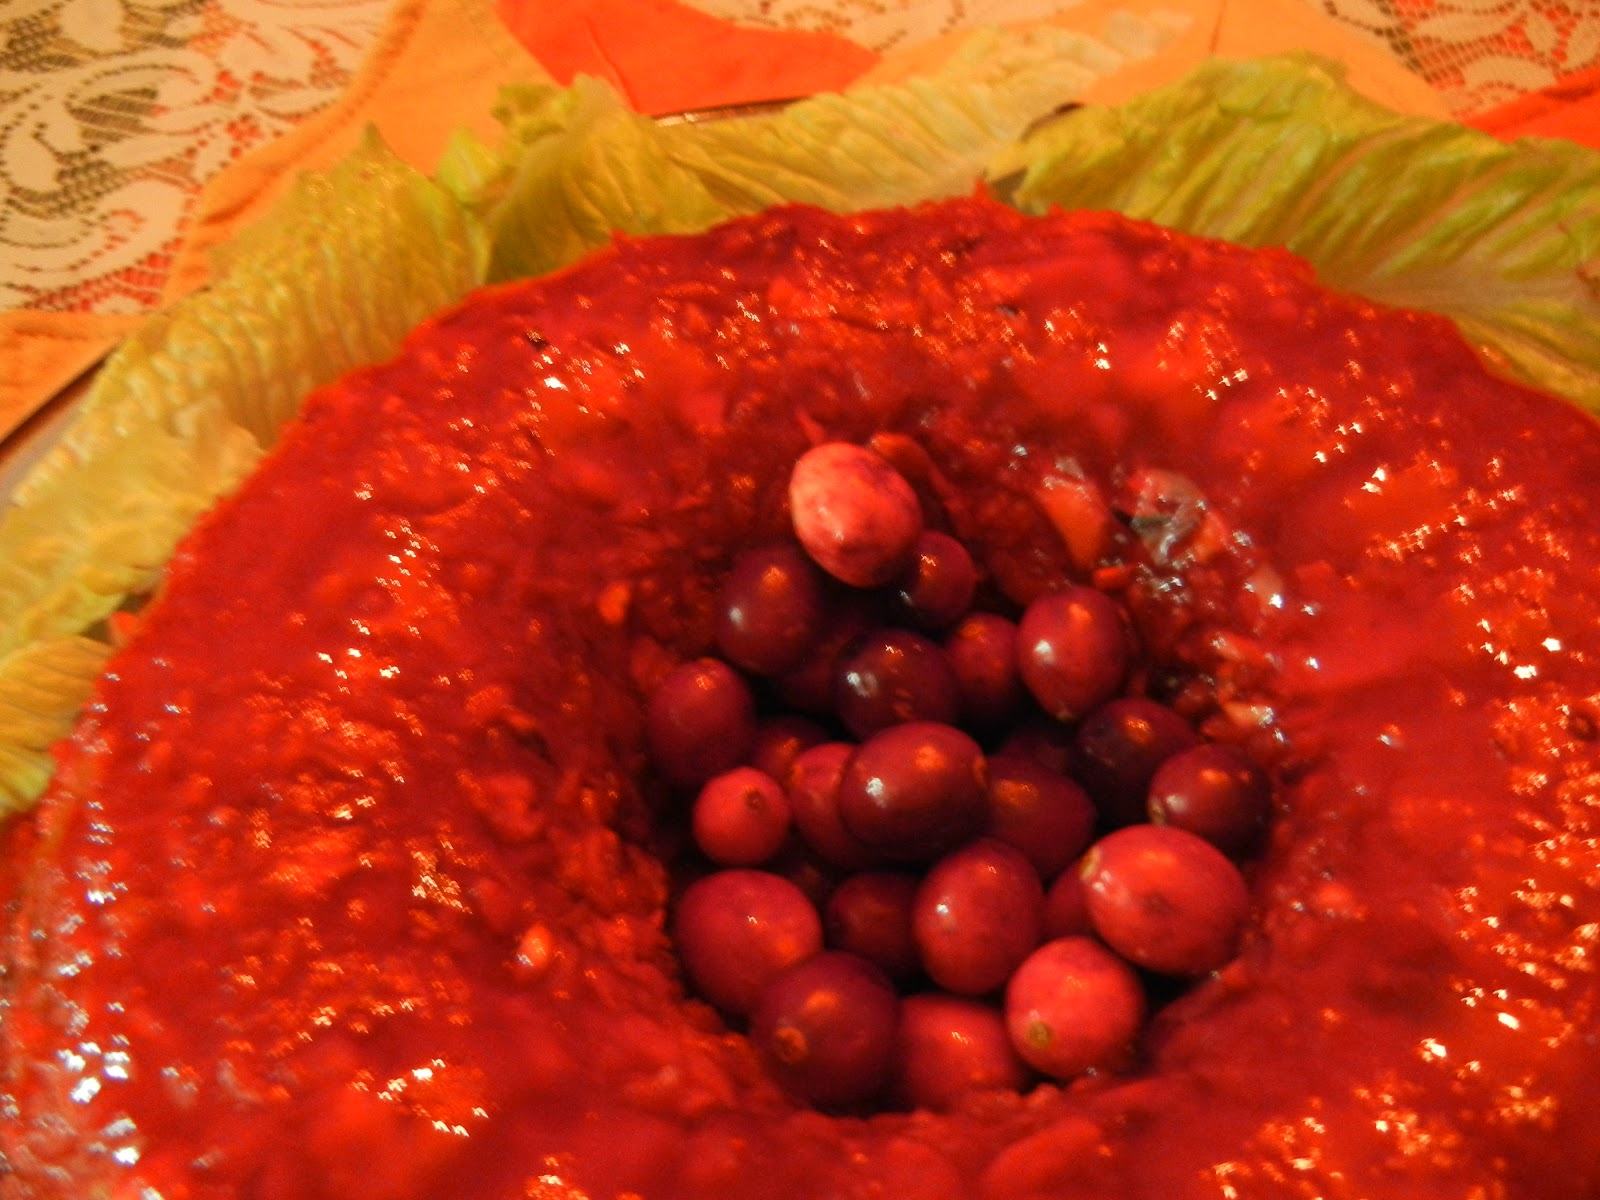 From My Southwest Kitchen: Cranberry Jello Salad